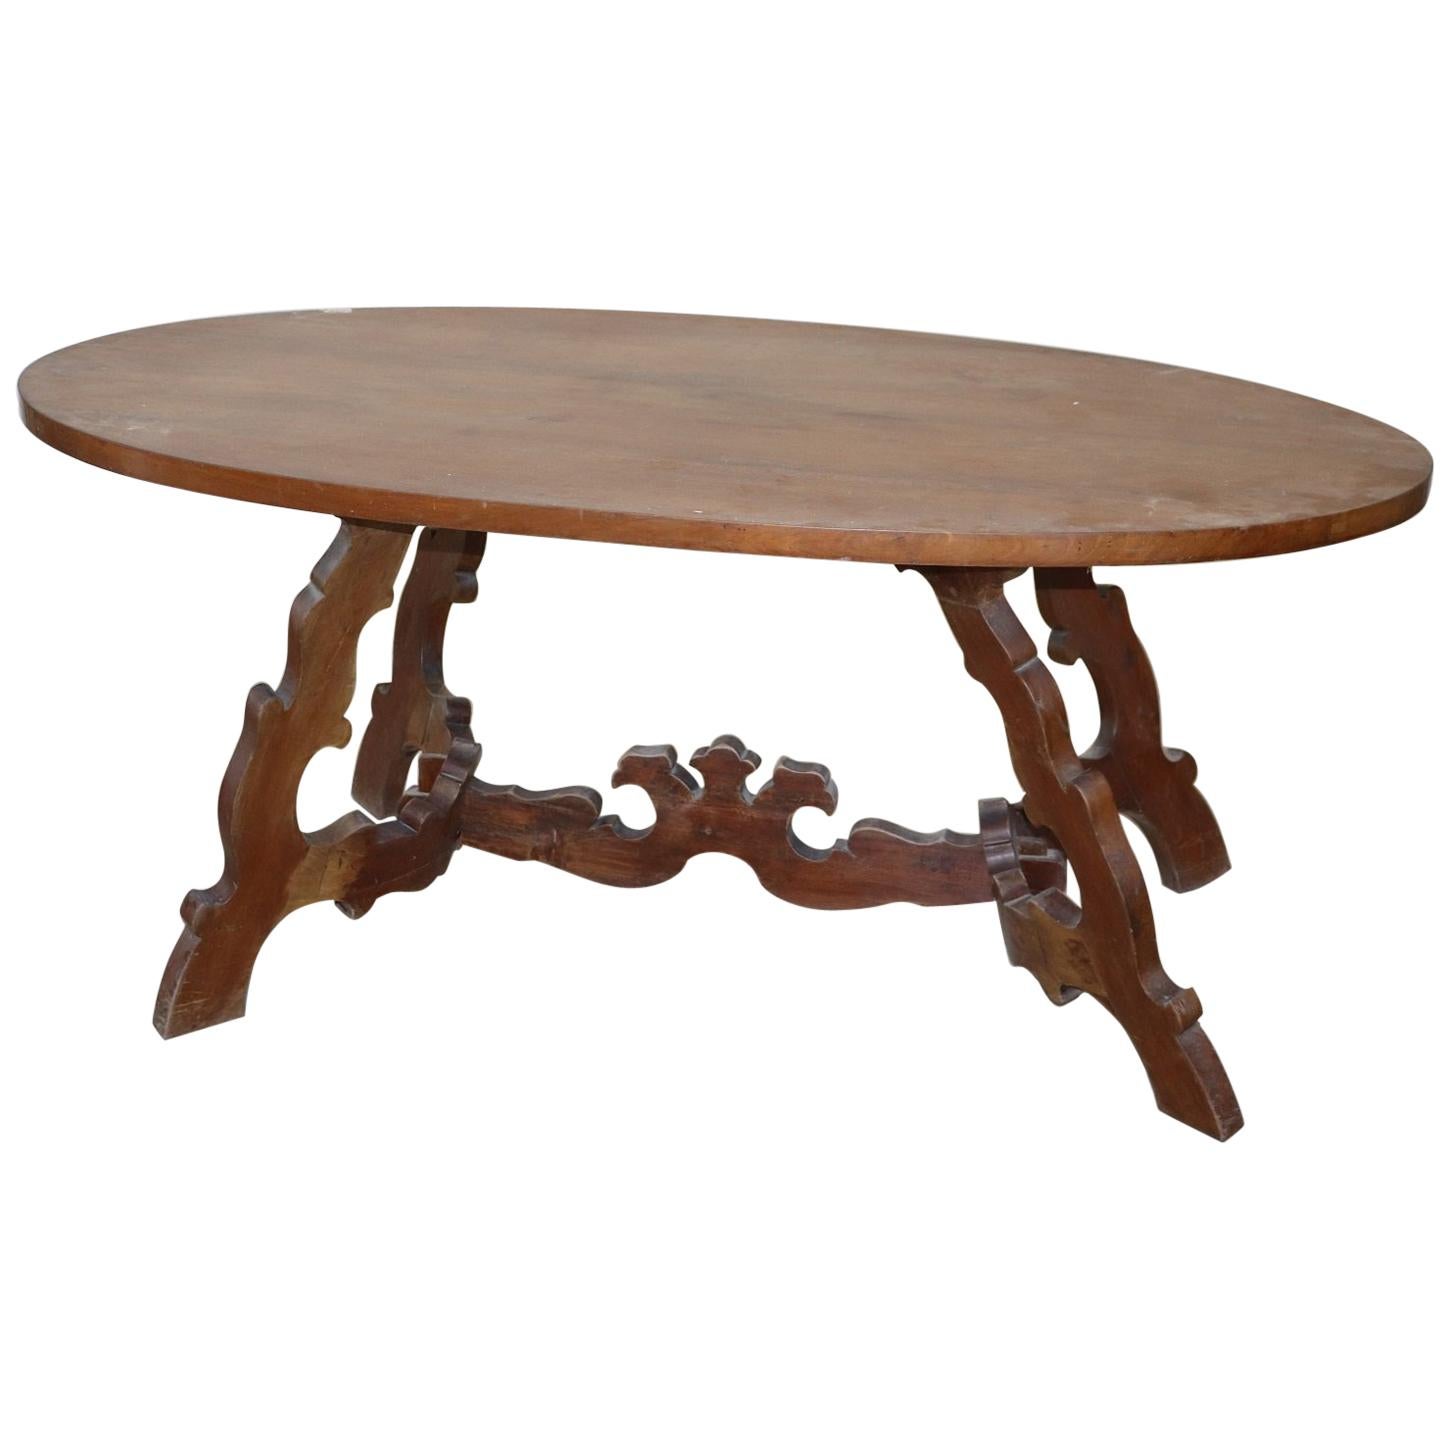 20th Century Italian Fratino Walnut Wood Oval Table with Lyre-Shaped Legs For Sale